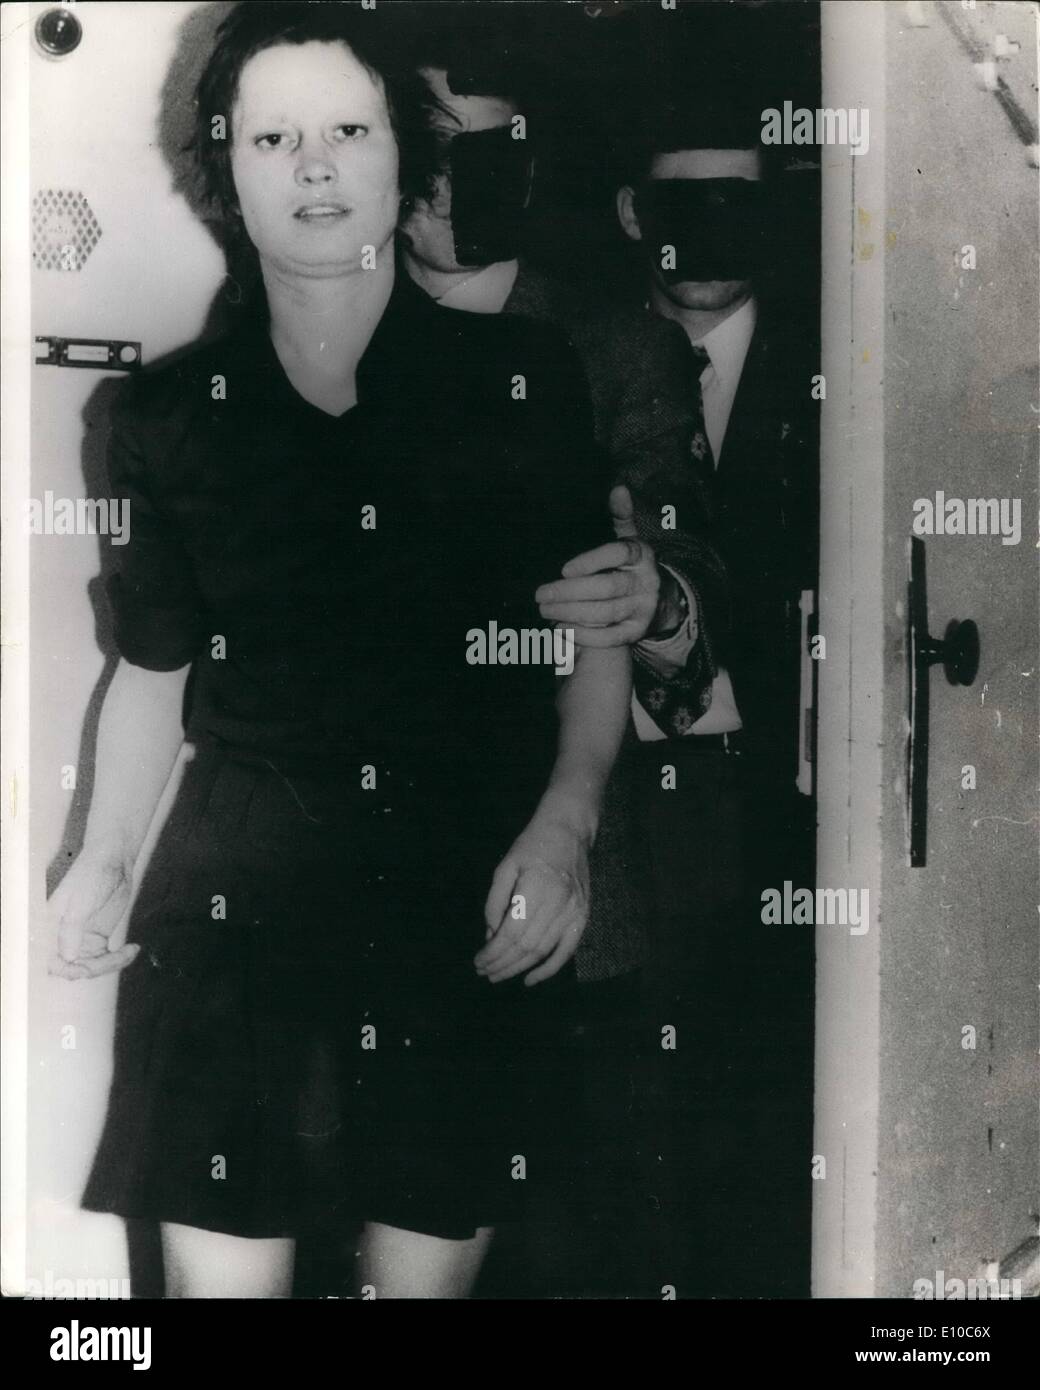 Jun. 06, 1972 - Woman Terrorist Gang Chief Seized In Germany: Ulrike Meinhof, 37, head of West Germany';s header-Menohof of Left-wing terrorists, has been arrested in Hanover, She was the most wanted in Germany. Police who received a tip-off burst into the flat near Hanover airport after a struggle overpowered Mainhof and Gergart Muller, a 24-year-old student, who was with her. In the flat were found a sub-machine-gun, three pistols, two hand grenades, a nine-pound bomb and ammunition. Photo Shows Ulrike Meinhof pictured after her arrest. Stock Photo